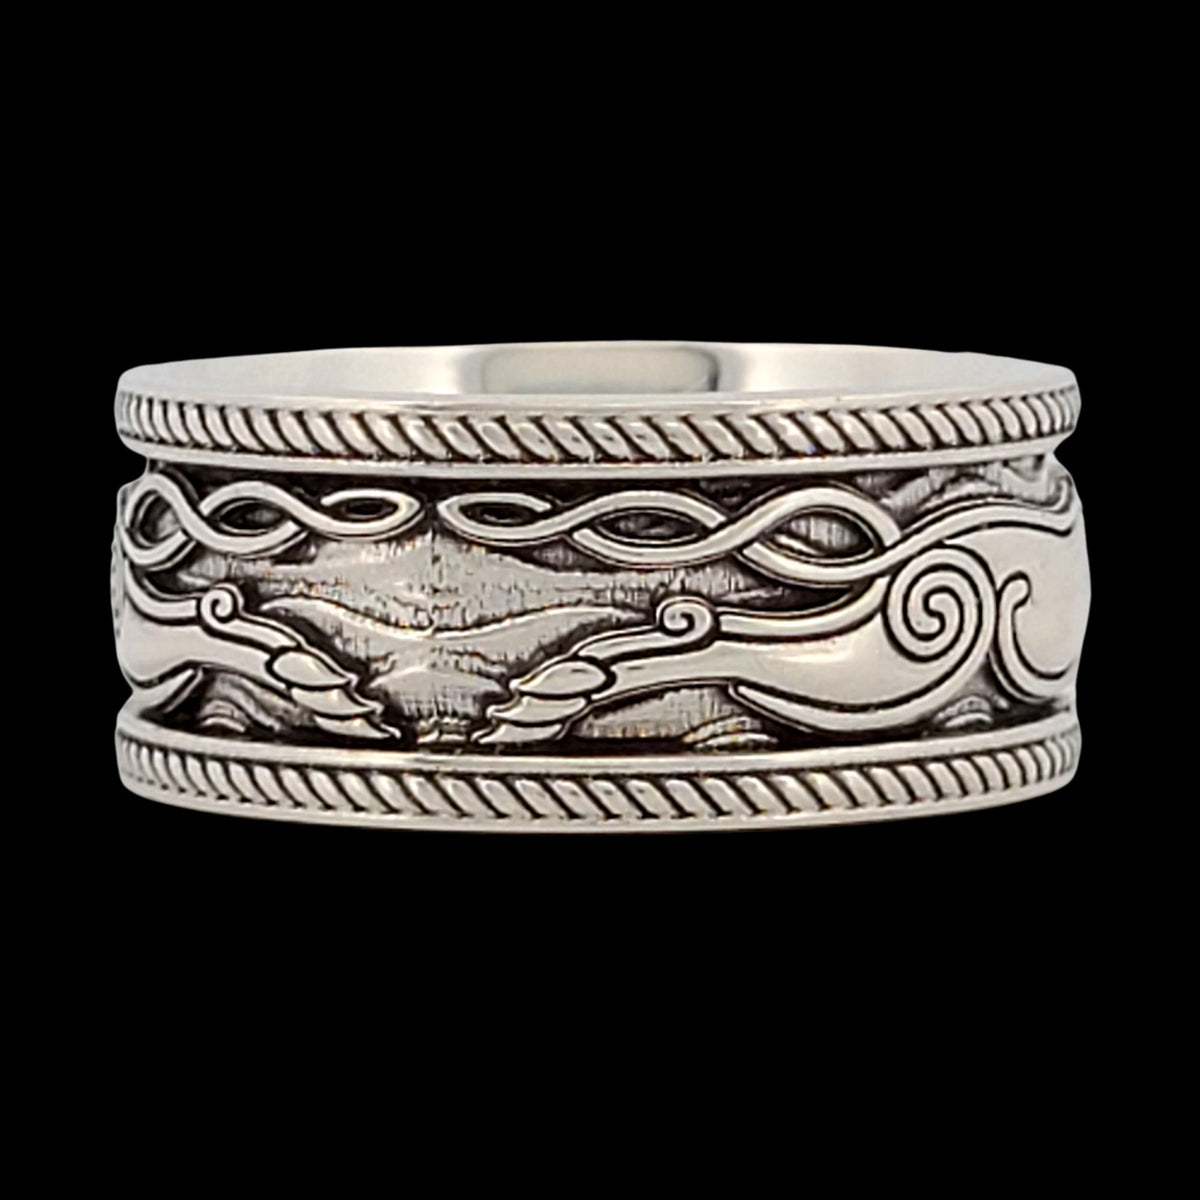 FENRIR THE WOLF ROPE Band Ring - Starting at $184